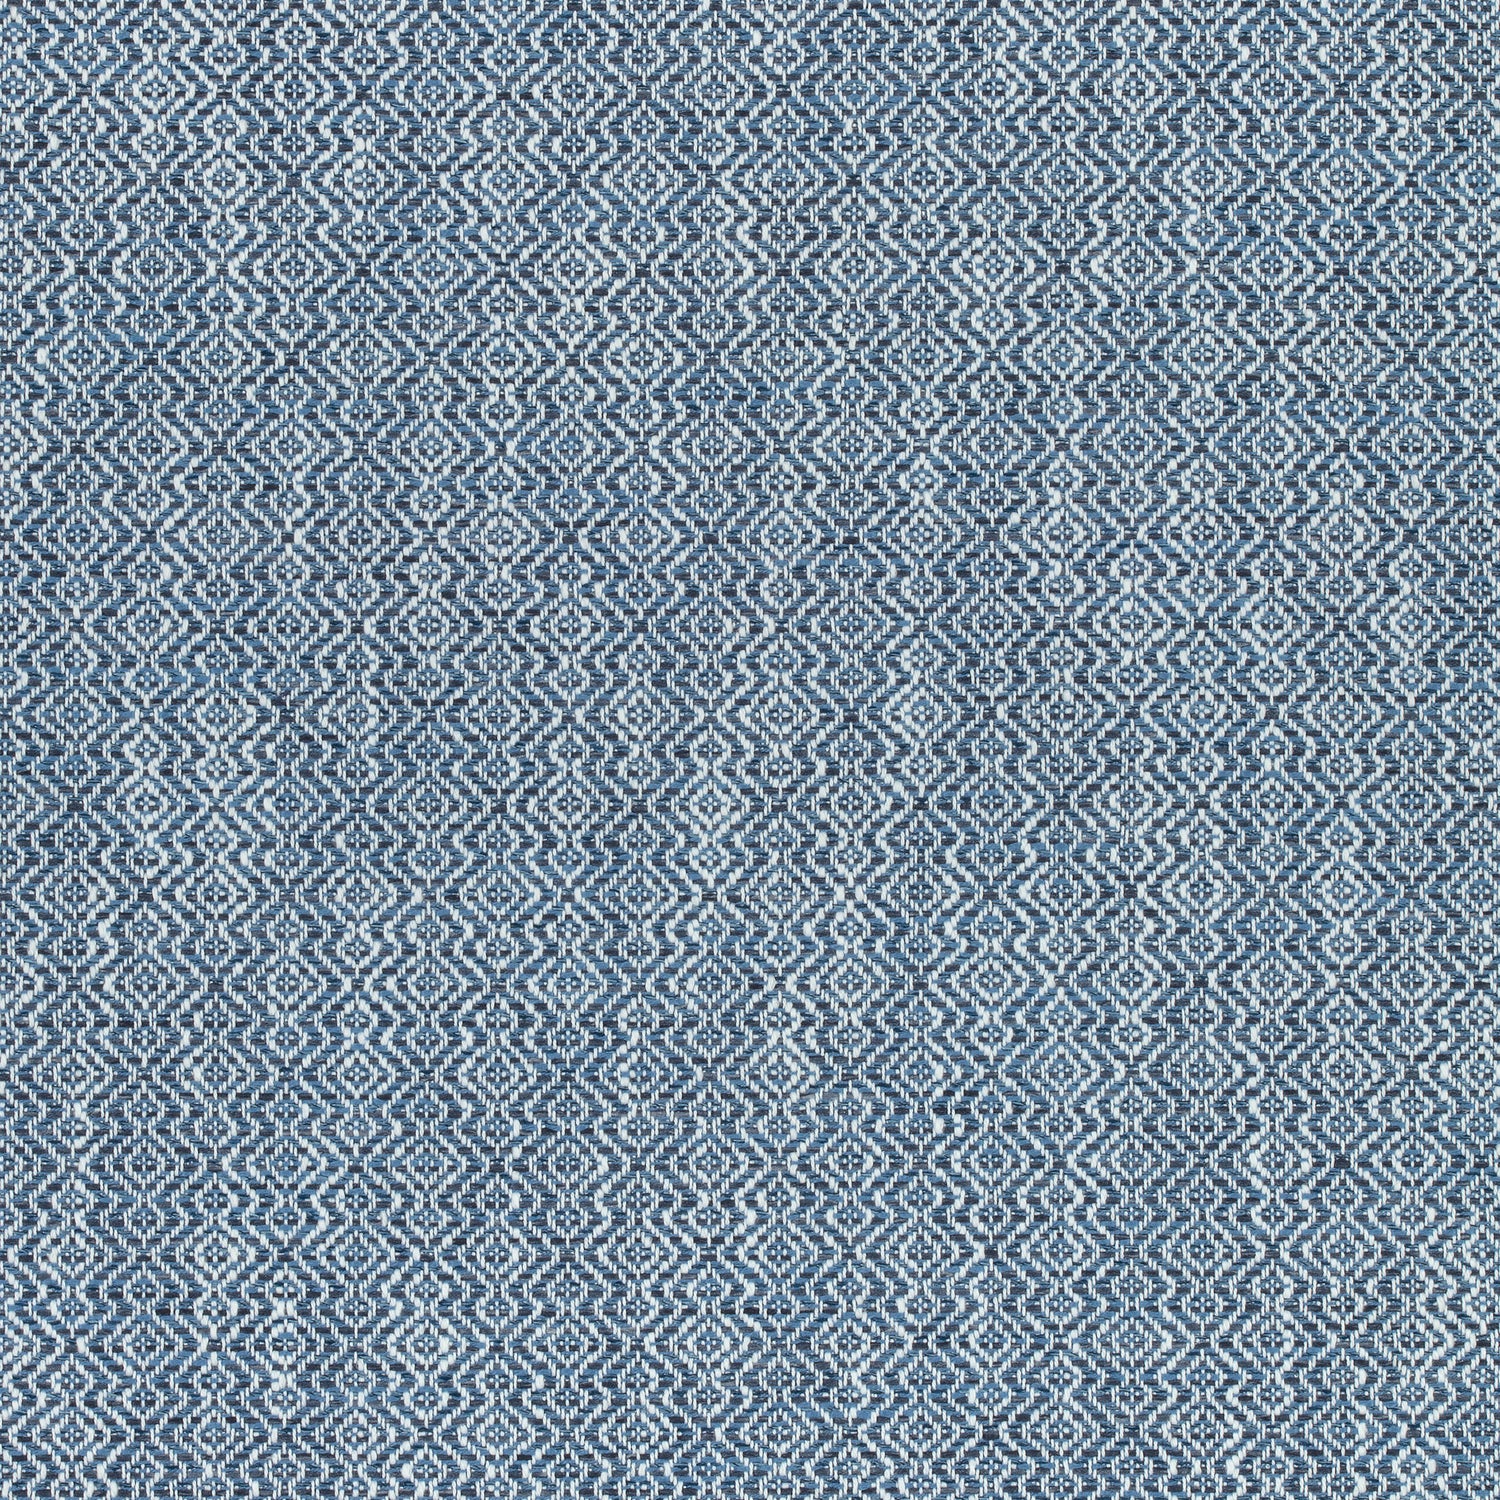 Kingsley fabric in royal blue color - pattern number W74070 - by Thibaut in the Cadence collection